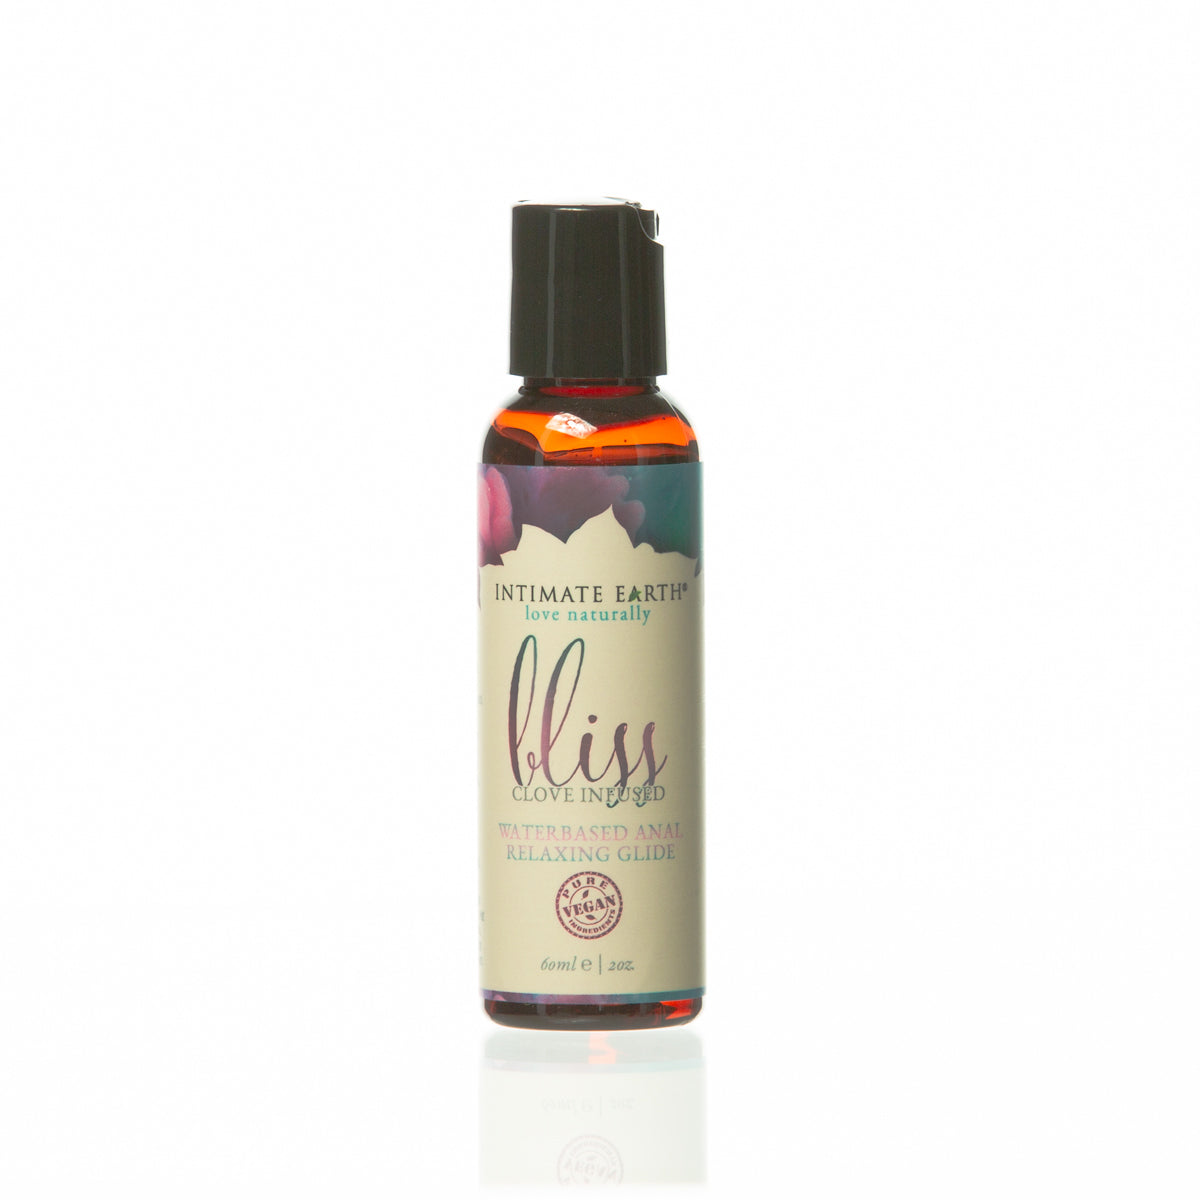 Intimate Earth Bliss Anal Relaxing Water Based Glide – 60ml/2oz